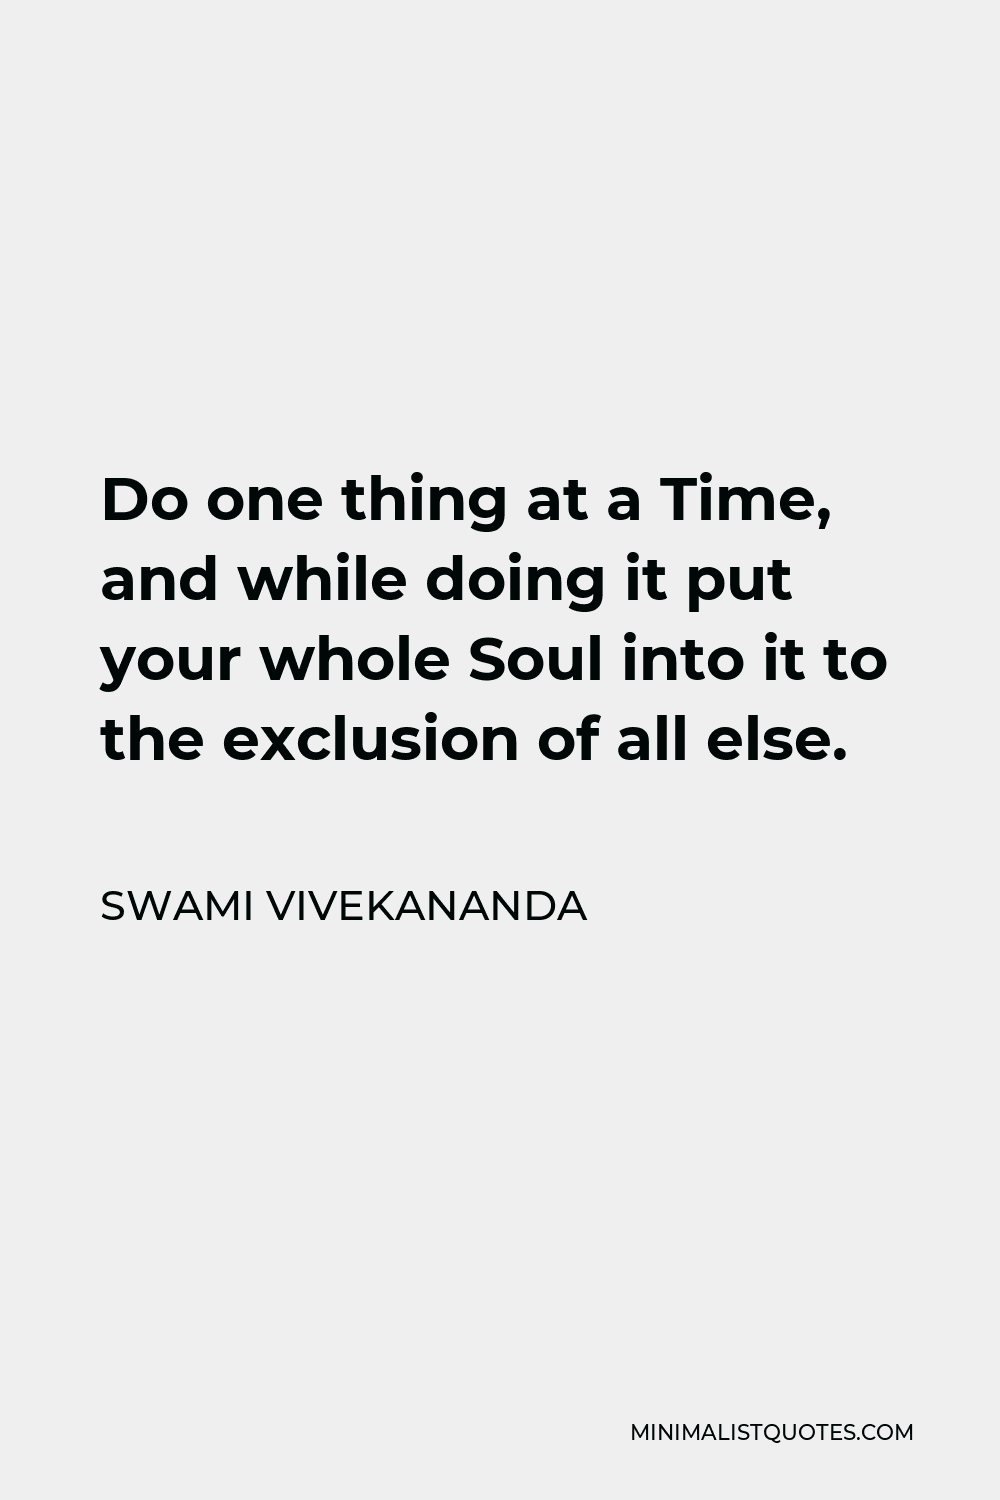 Swami Vivekananda Quote - Do one thing at a Time, and while doing it put your whole Soul into it to the exclusion of all else.